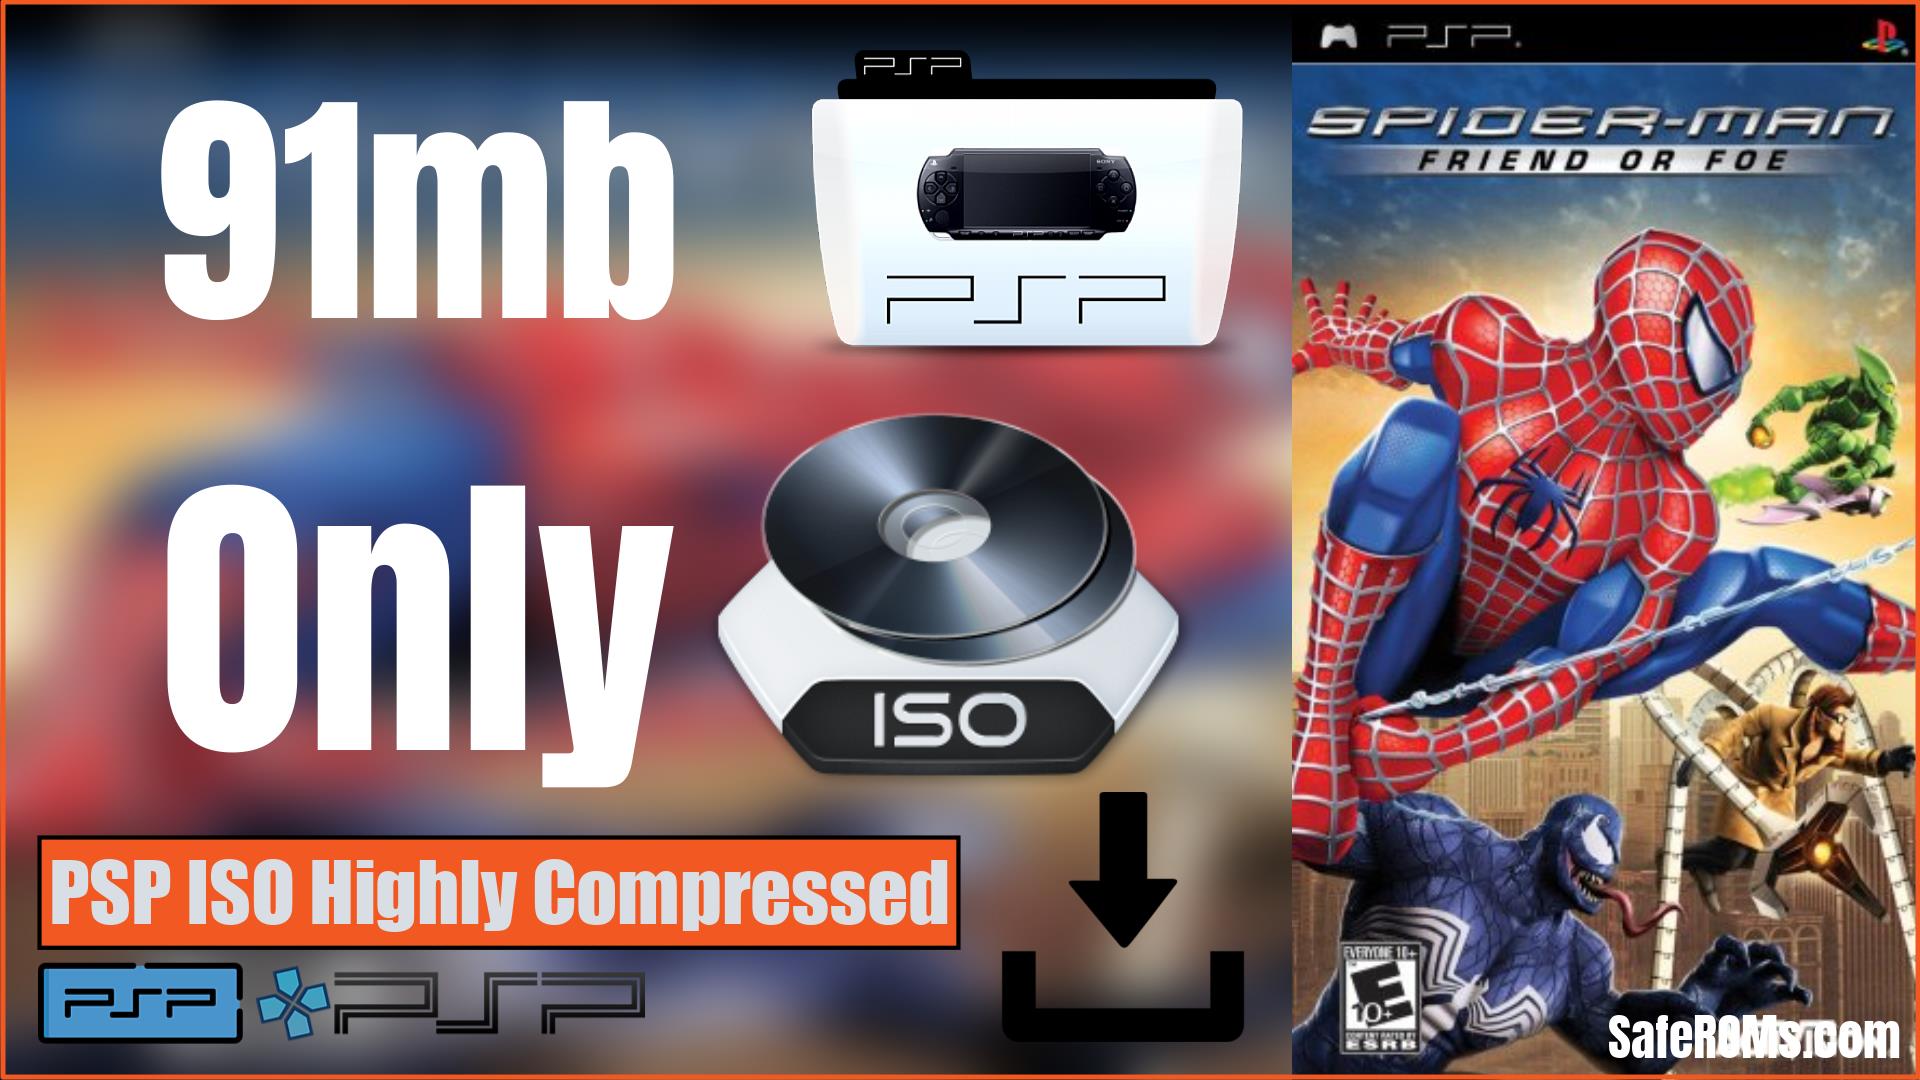 Spider-Man Friend or Foe (91mb) PSP ISO Highly Compressed Download